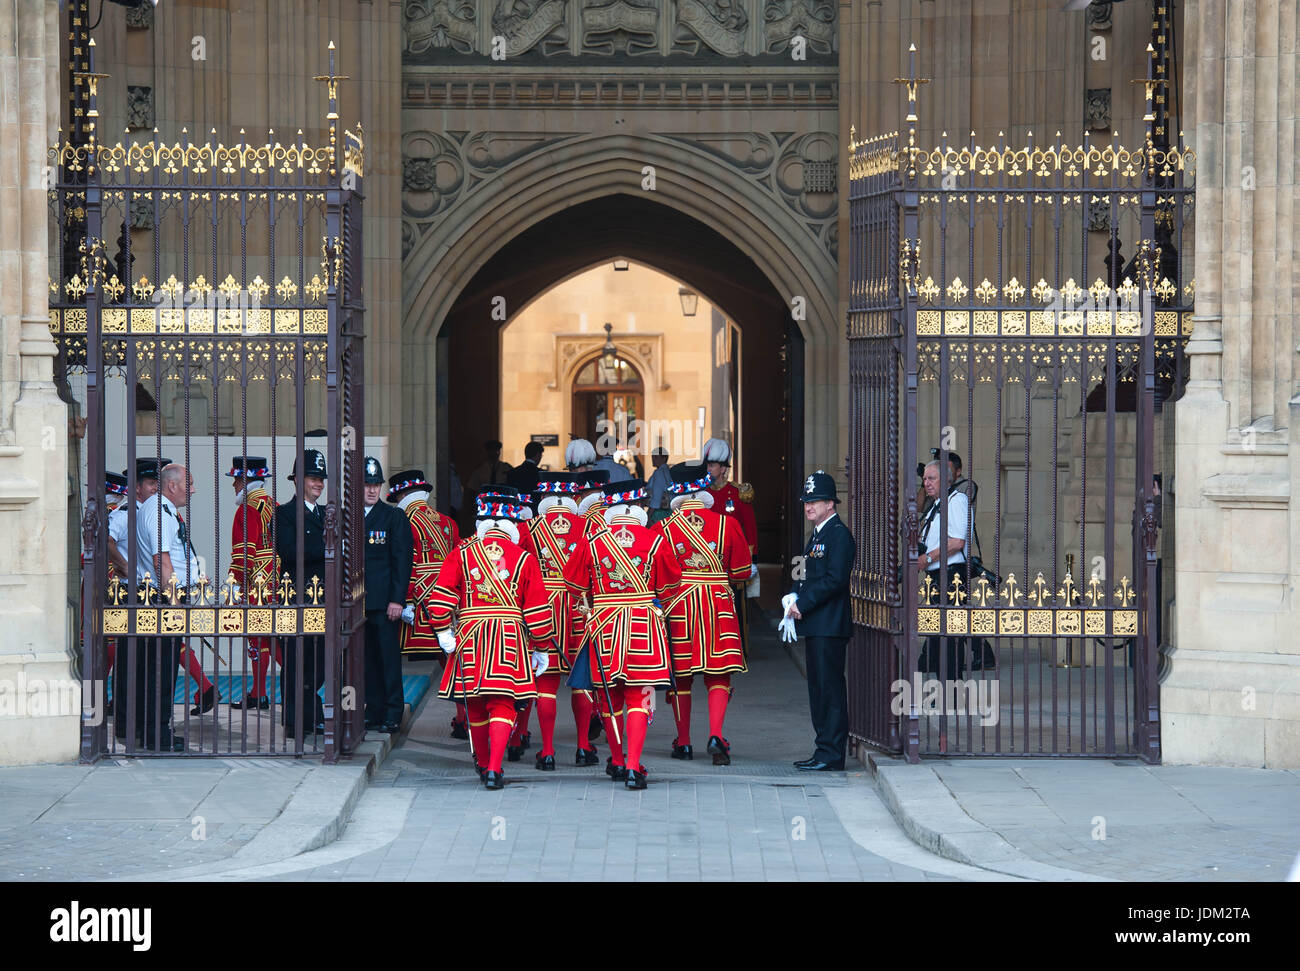 London, United Kingdom. 21st June 2017. Queen Elizabeth II on their way to the Houses of Parliament  before she addresses the State Opening of Parliament in the House of Lords at the Palace of Westminster. The State Opening of Parliament is the formal start of the parliamentary year. This year's Queen's Speech, setting out the government's agenda for the coming session  Michael Tubi / Alamy Live News Stock Photo